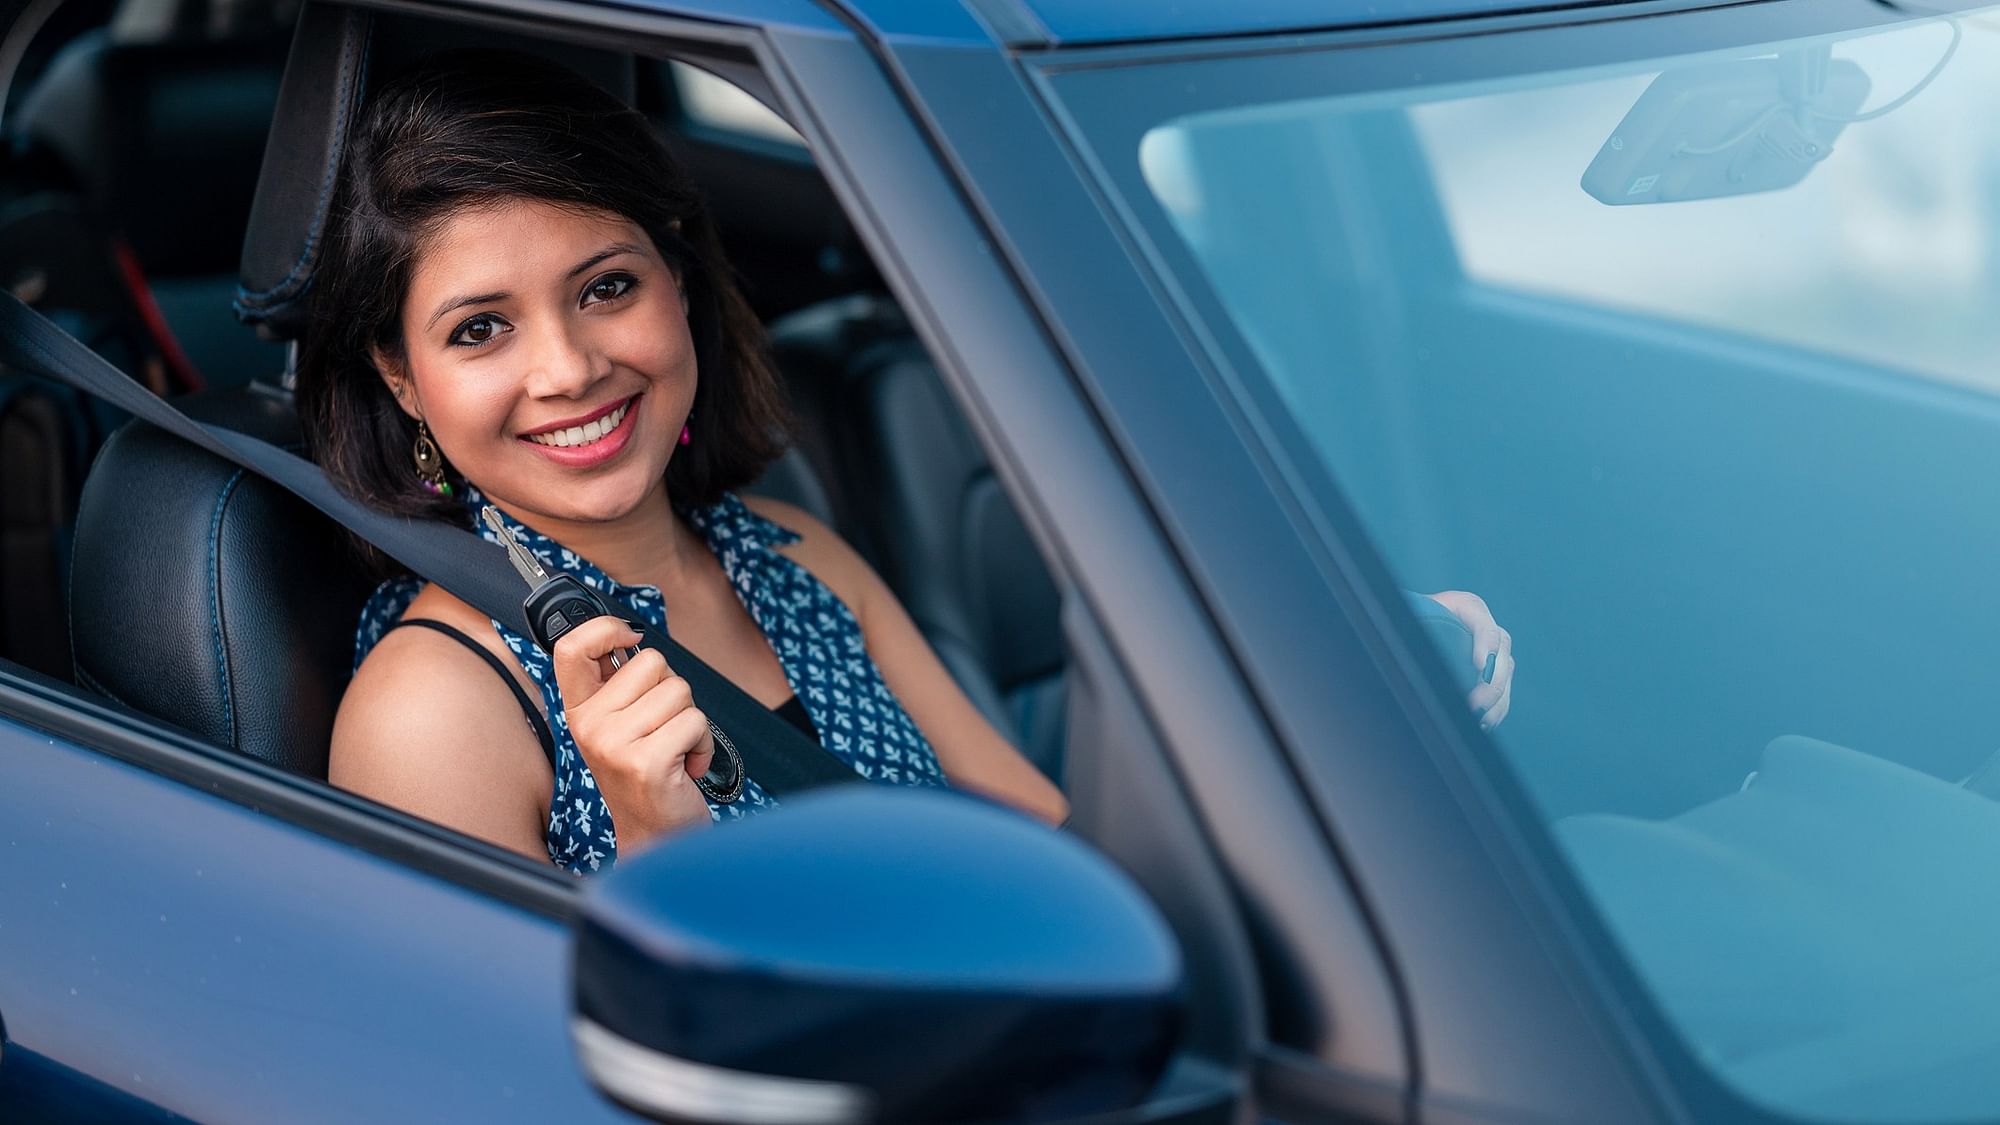 <div class="paragraphs"><p>Make an informed decision when buying or renewing car insurance. Find the best coverage options, personalized add-ons, and expert advice to save money and protect your vehicle.</p></div>